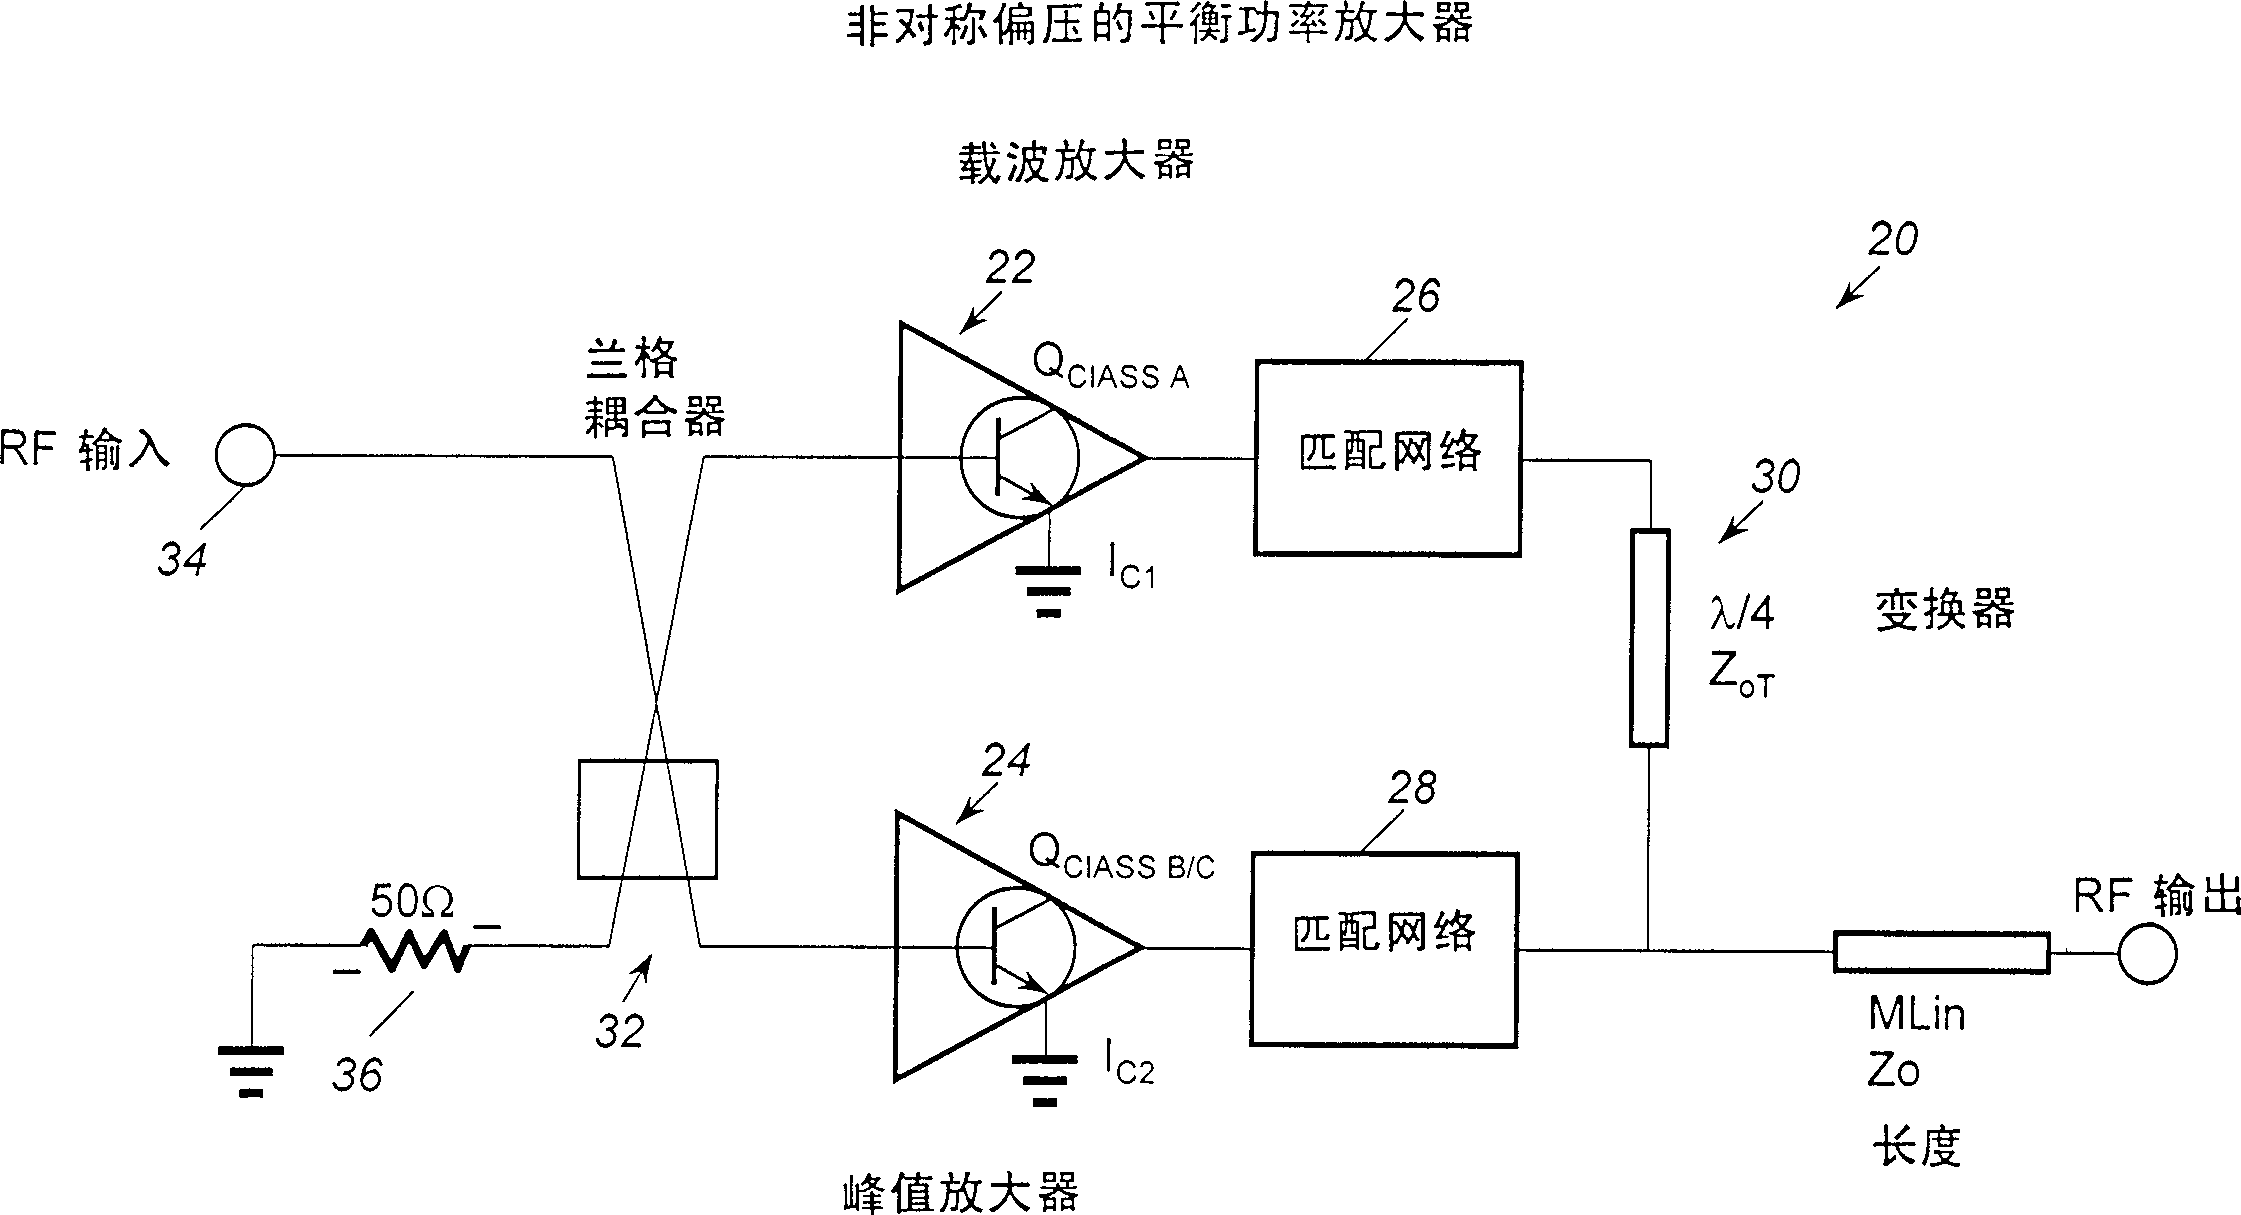 High linear balanced amplifier with asymmetric biassed voltages